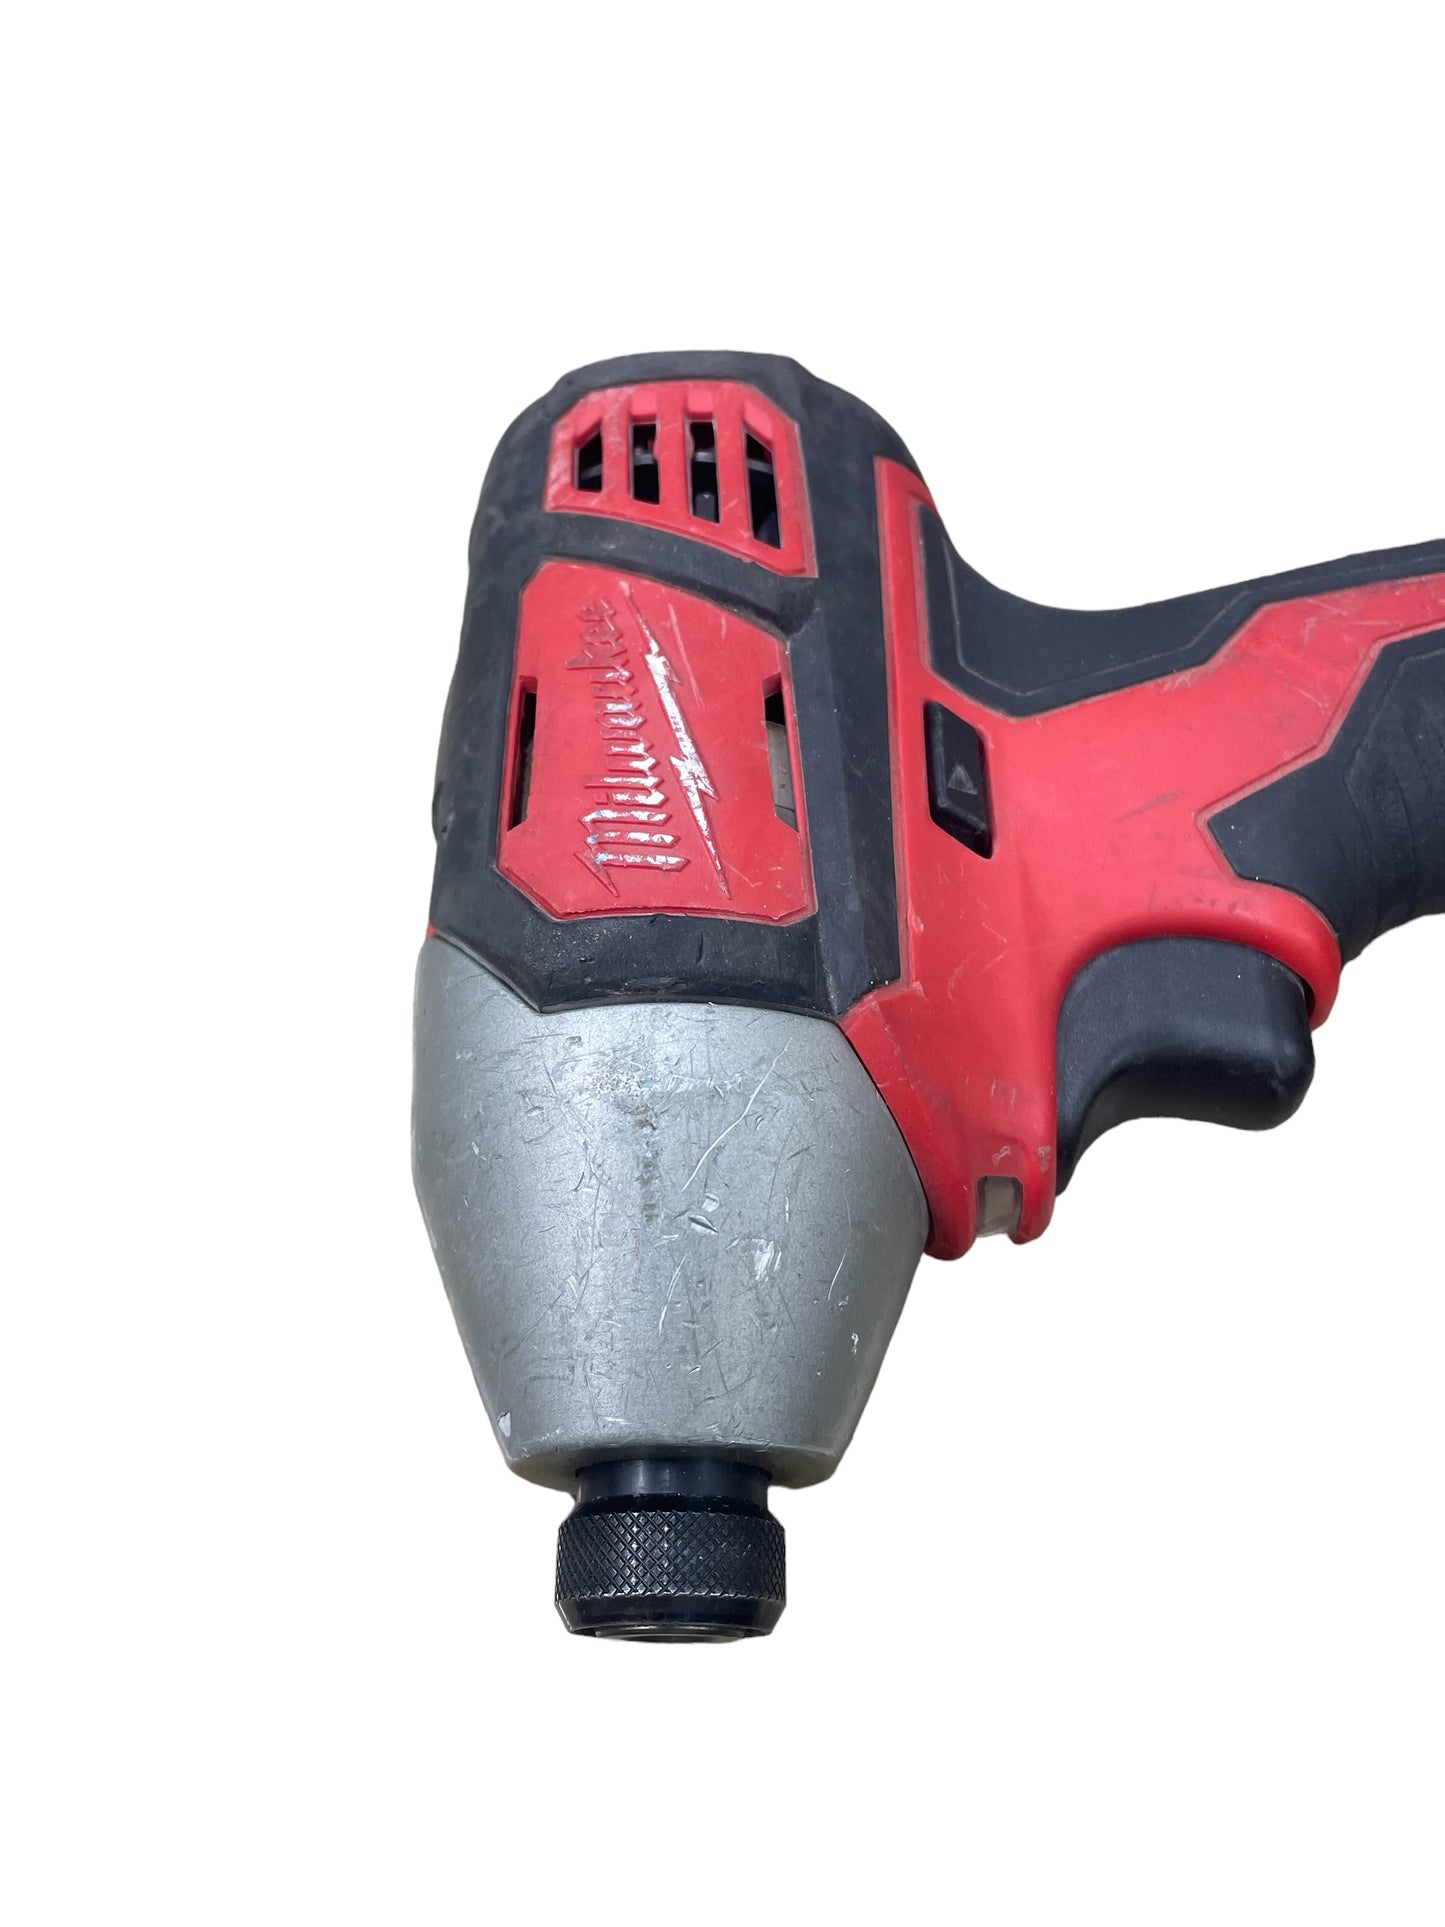 Milwaukee 2656-20 M18 1/4" Hex Impact Driver (Tool Only)